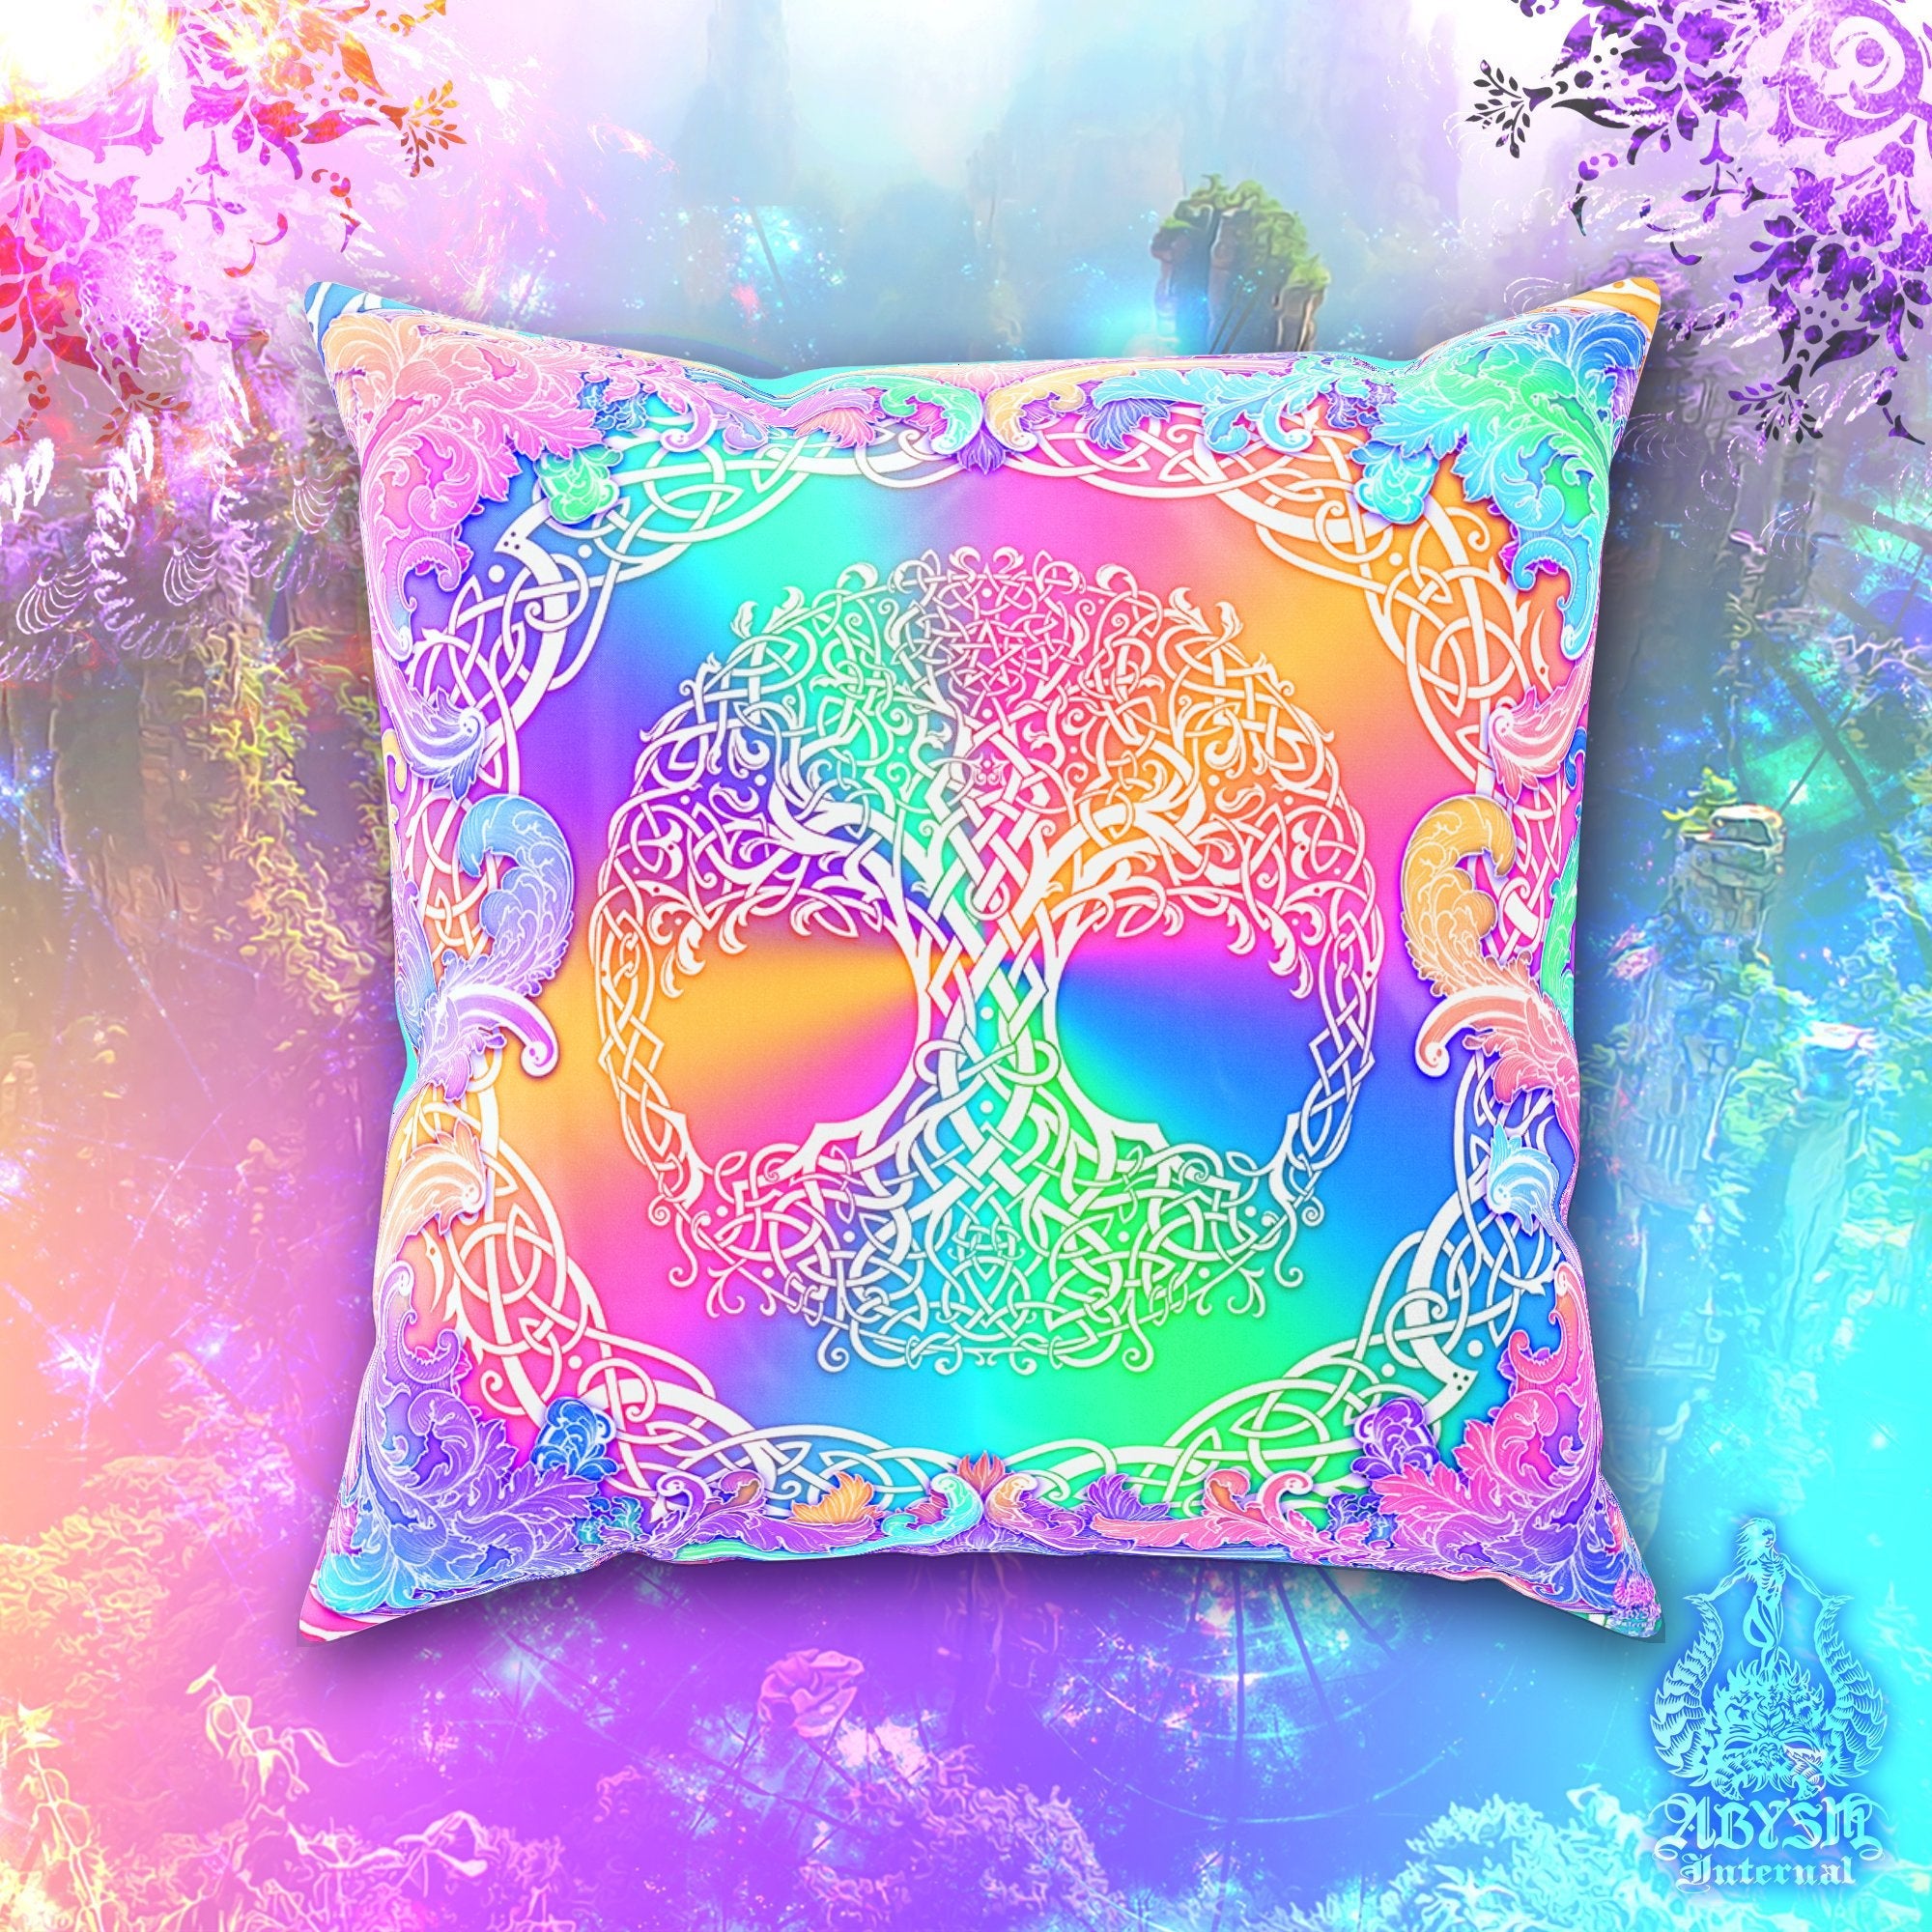 Tree of Life Throw Pillow, Decorative Accent Cushion, Wicca, Aesthetic and Pagan Room Decor, Witchy Art, Celtic Knot, Funky and Eclectic Home - Holographic Pastel - Abysm Internal